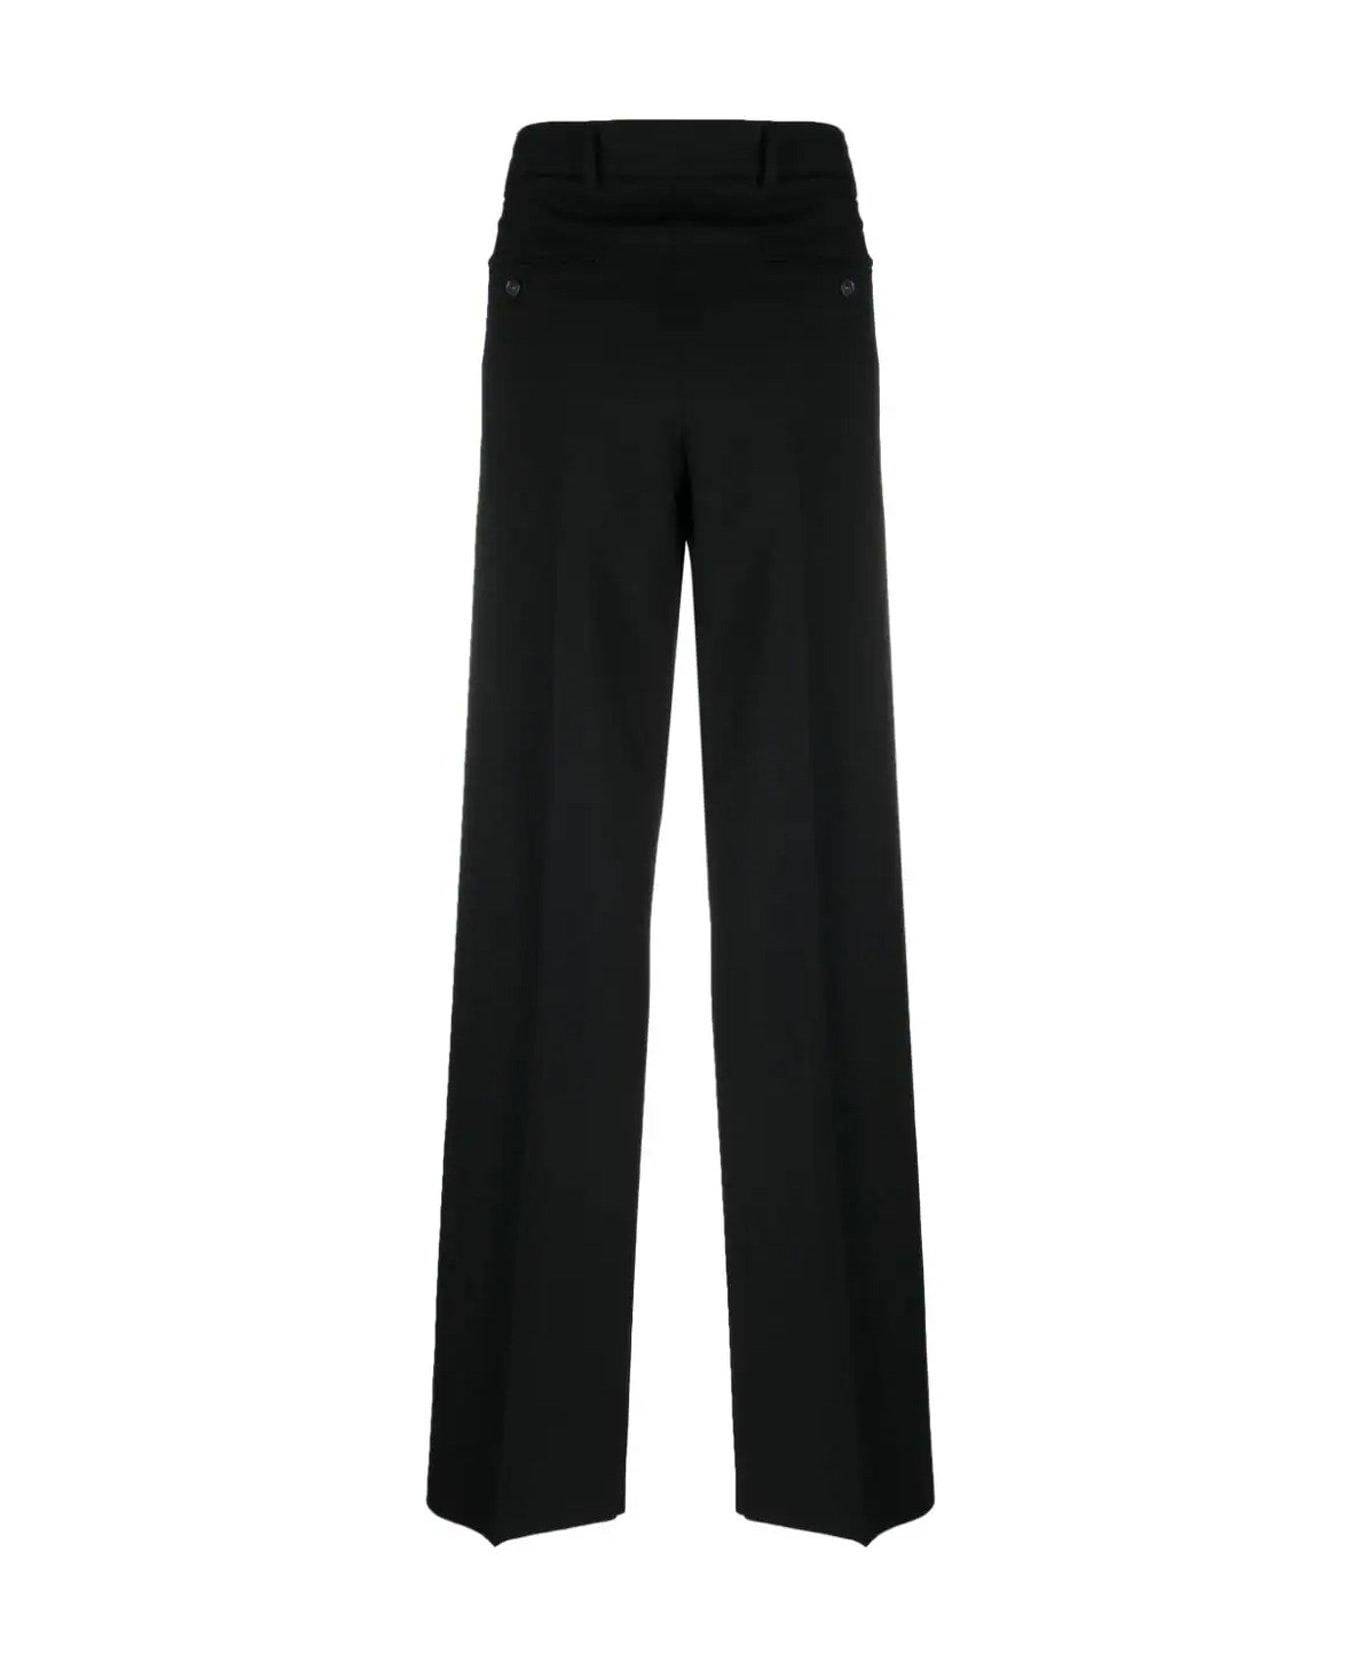 SportMax Pleated Tailored Trousers - NERO